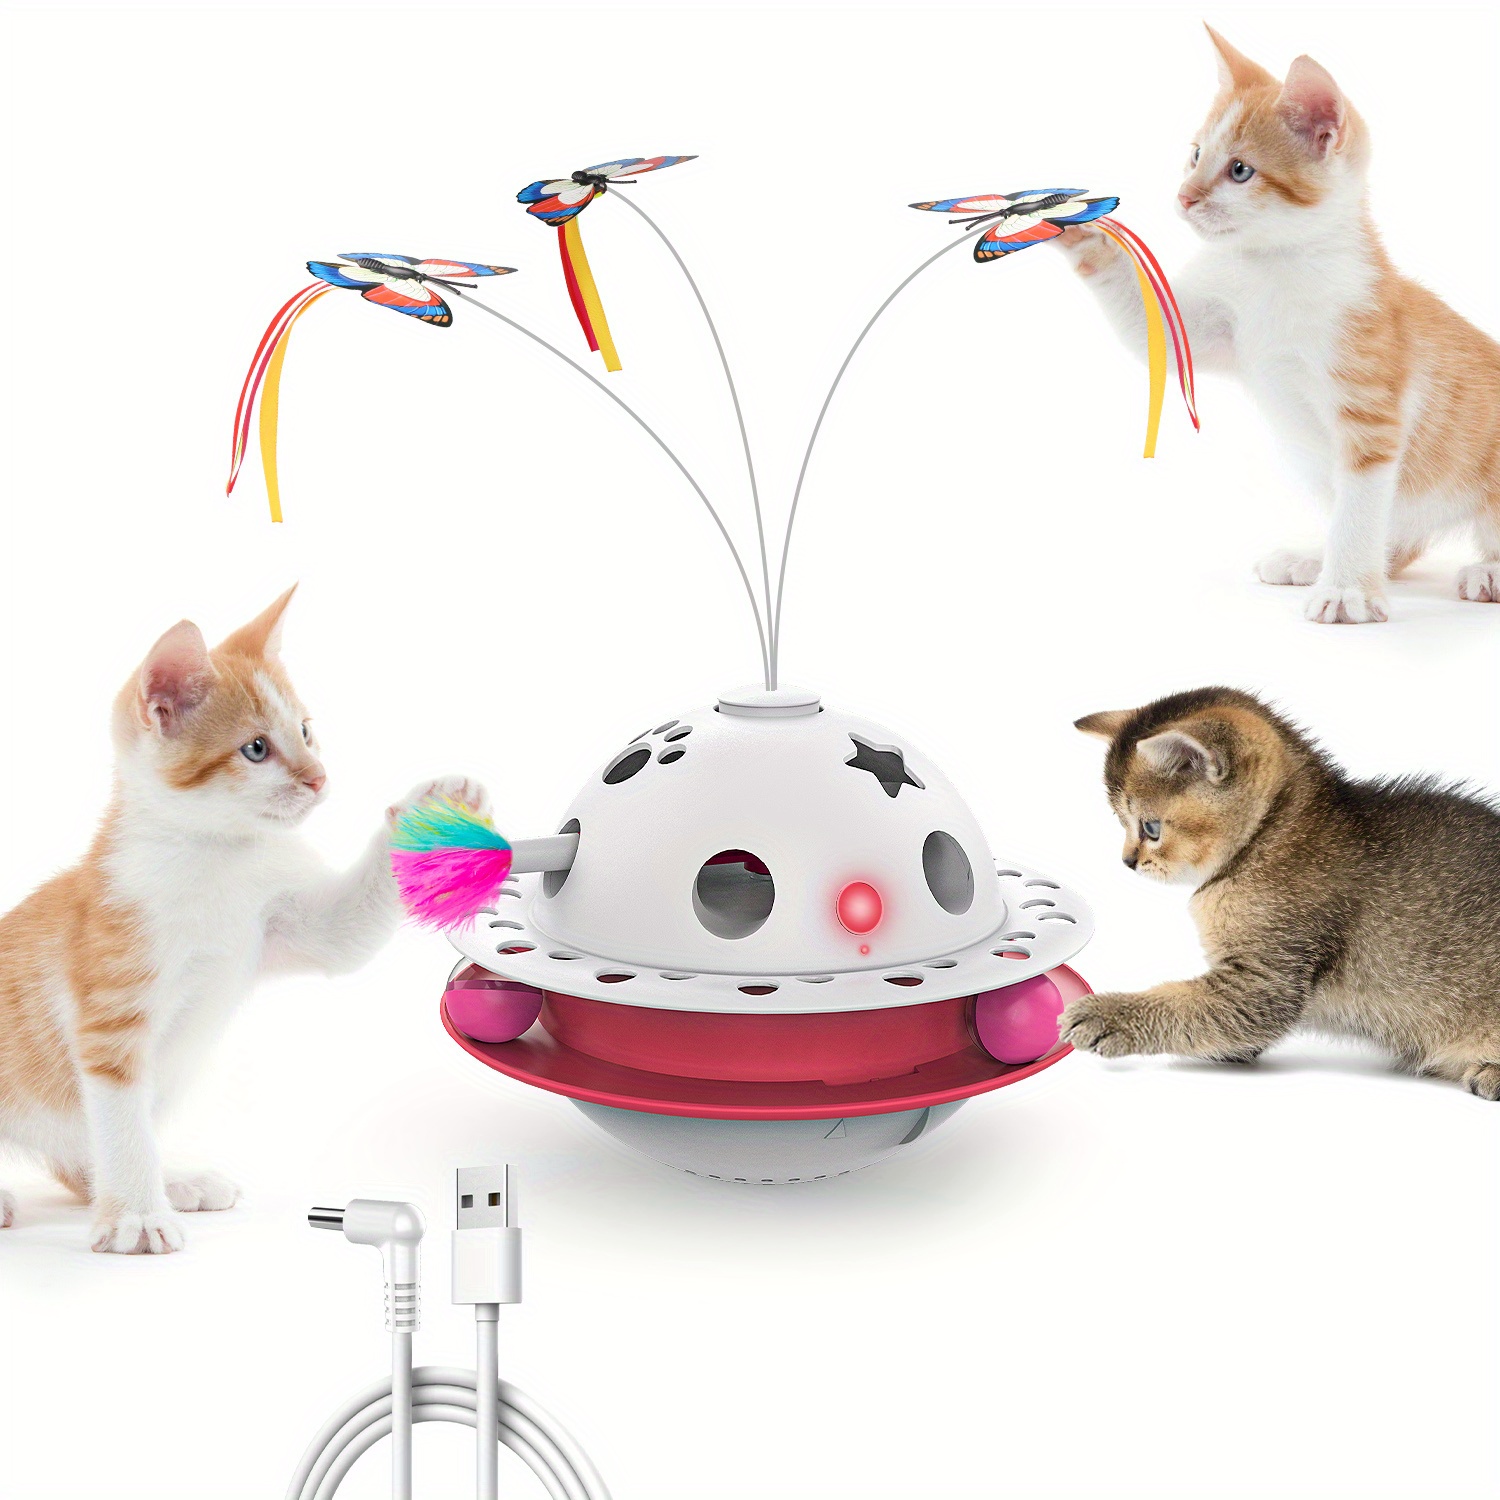 

Orey Cat Toys 3-in-1 Smart Interactive Electronic Kitten Toy Random Moving Ambush Feather Balls Indoor Exercise Cat Dog Pet Products